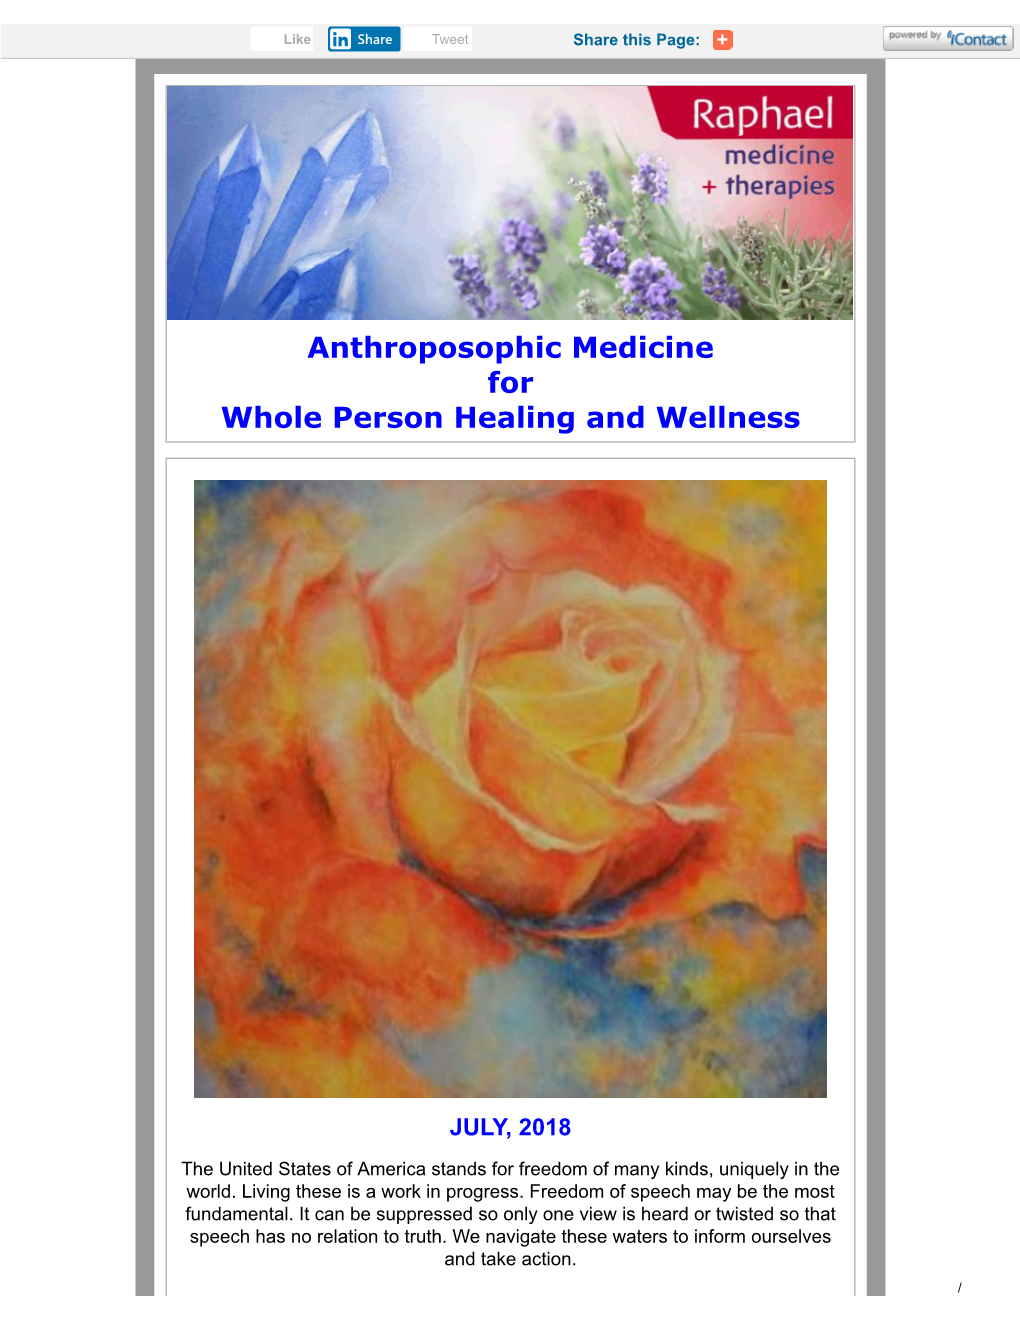 Anthroposophic Medicine for Whole Person Healing and Wellness